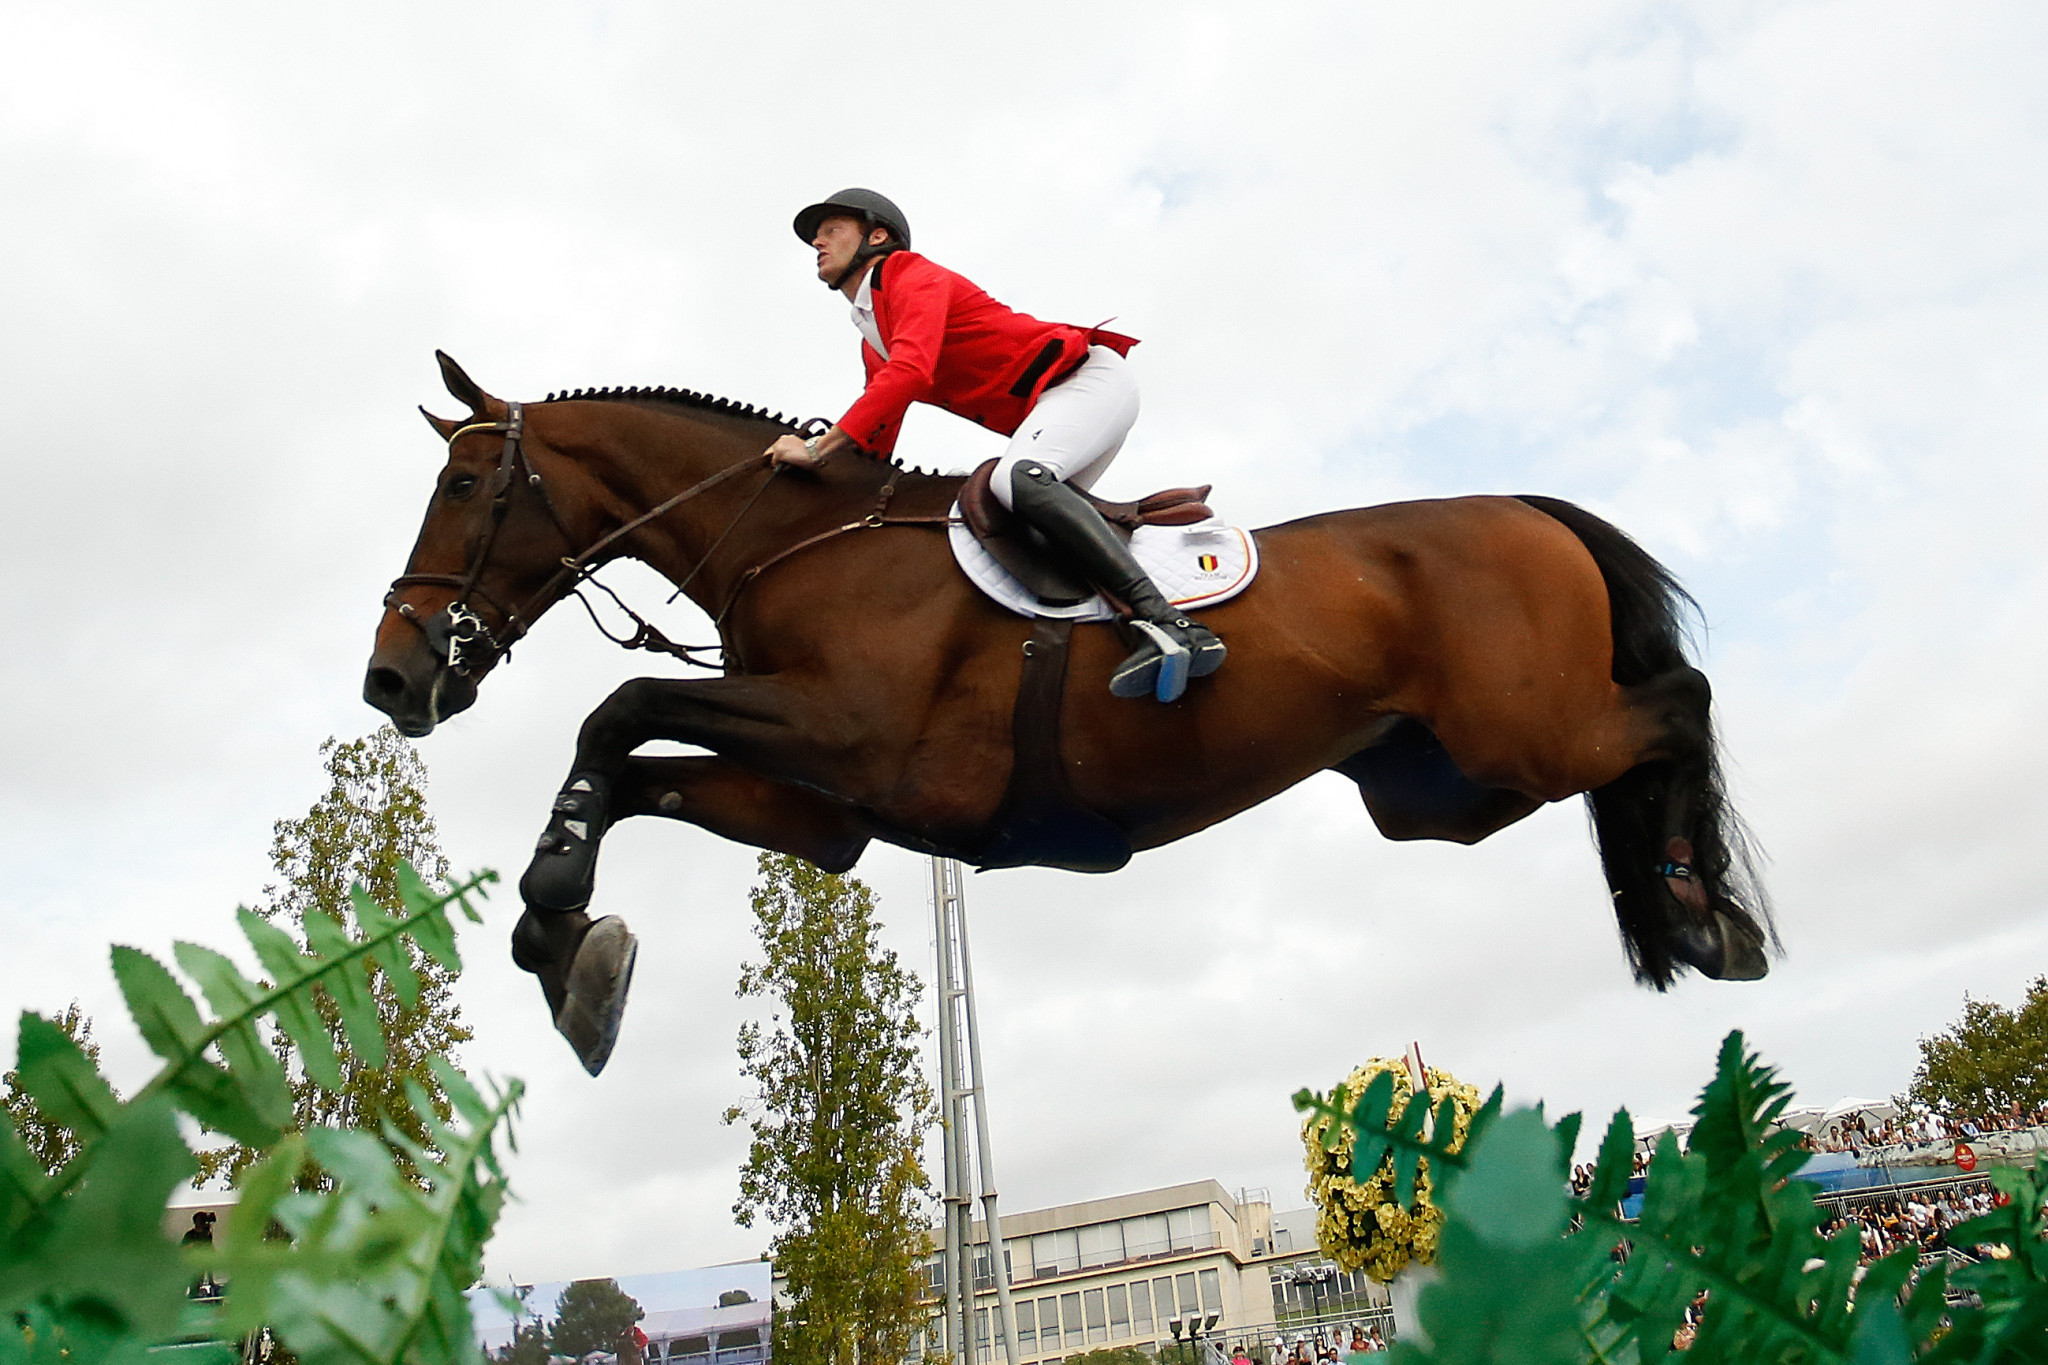 FEI events in mainland Europe cannot resume until April 11 ©Getty Images